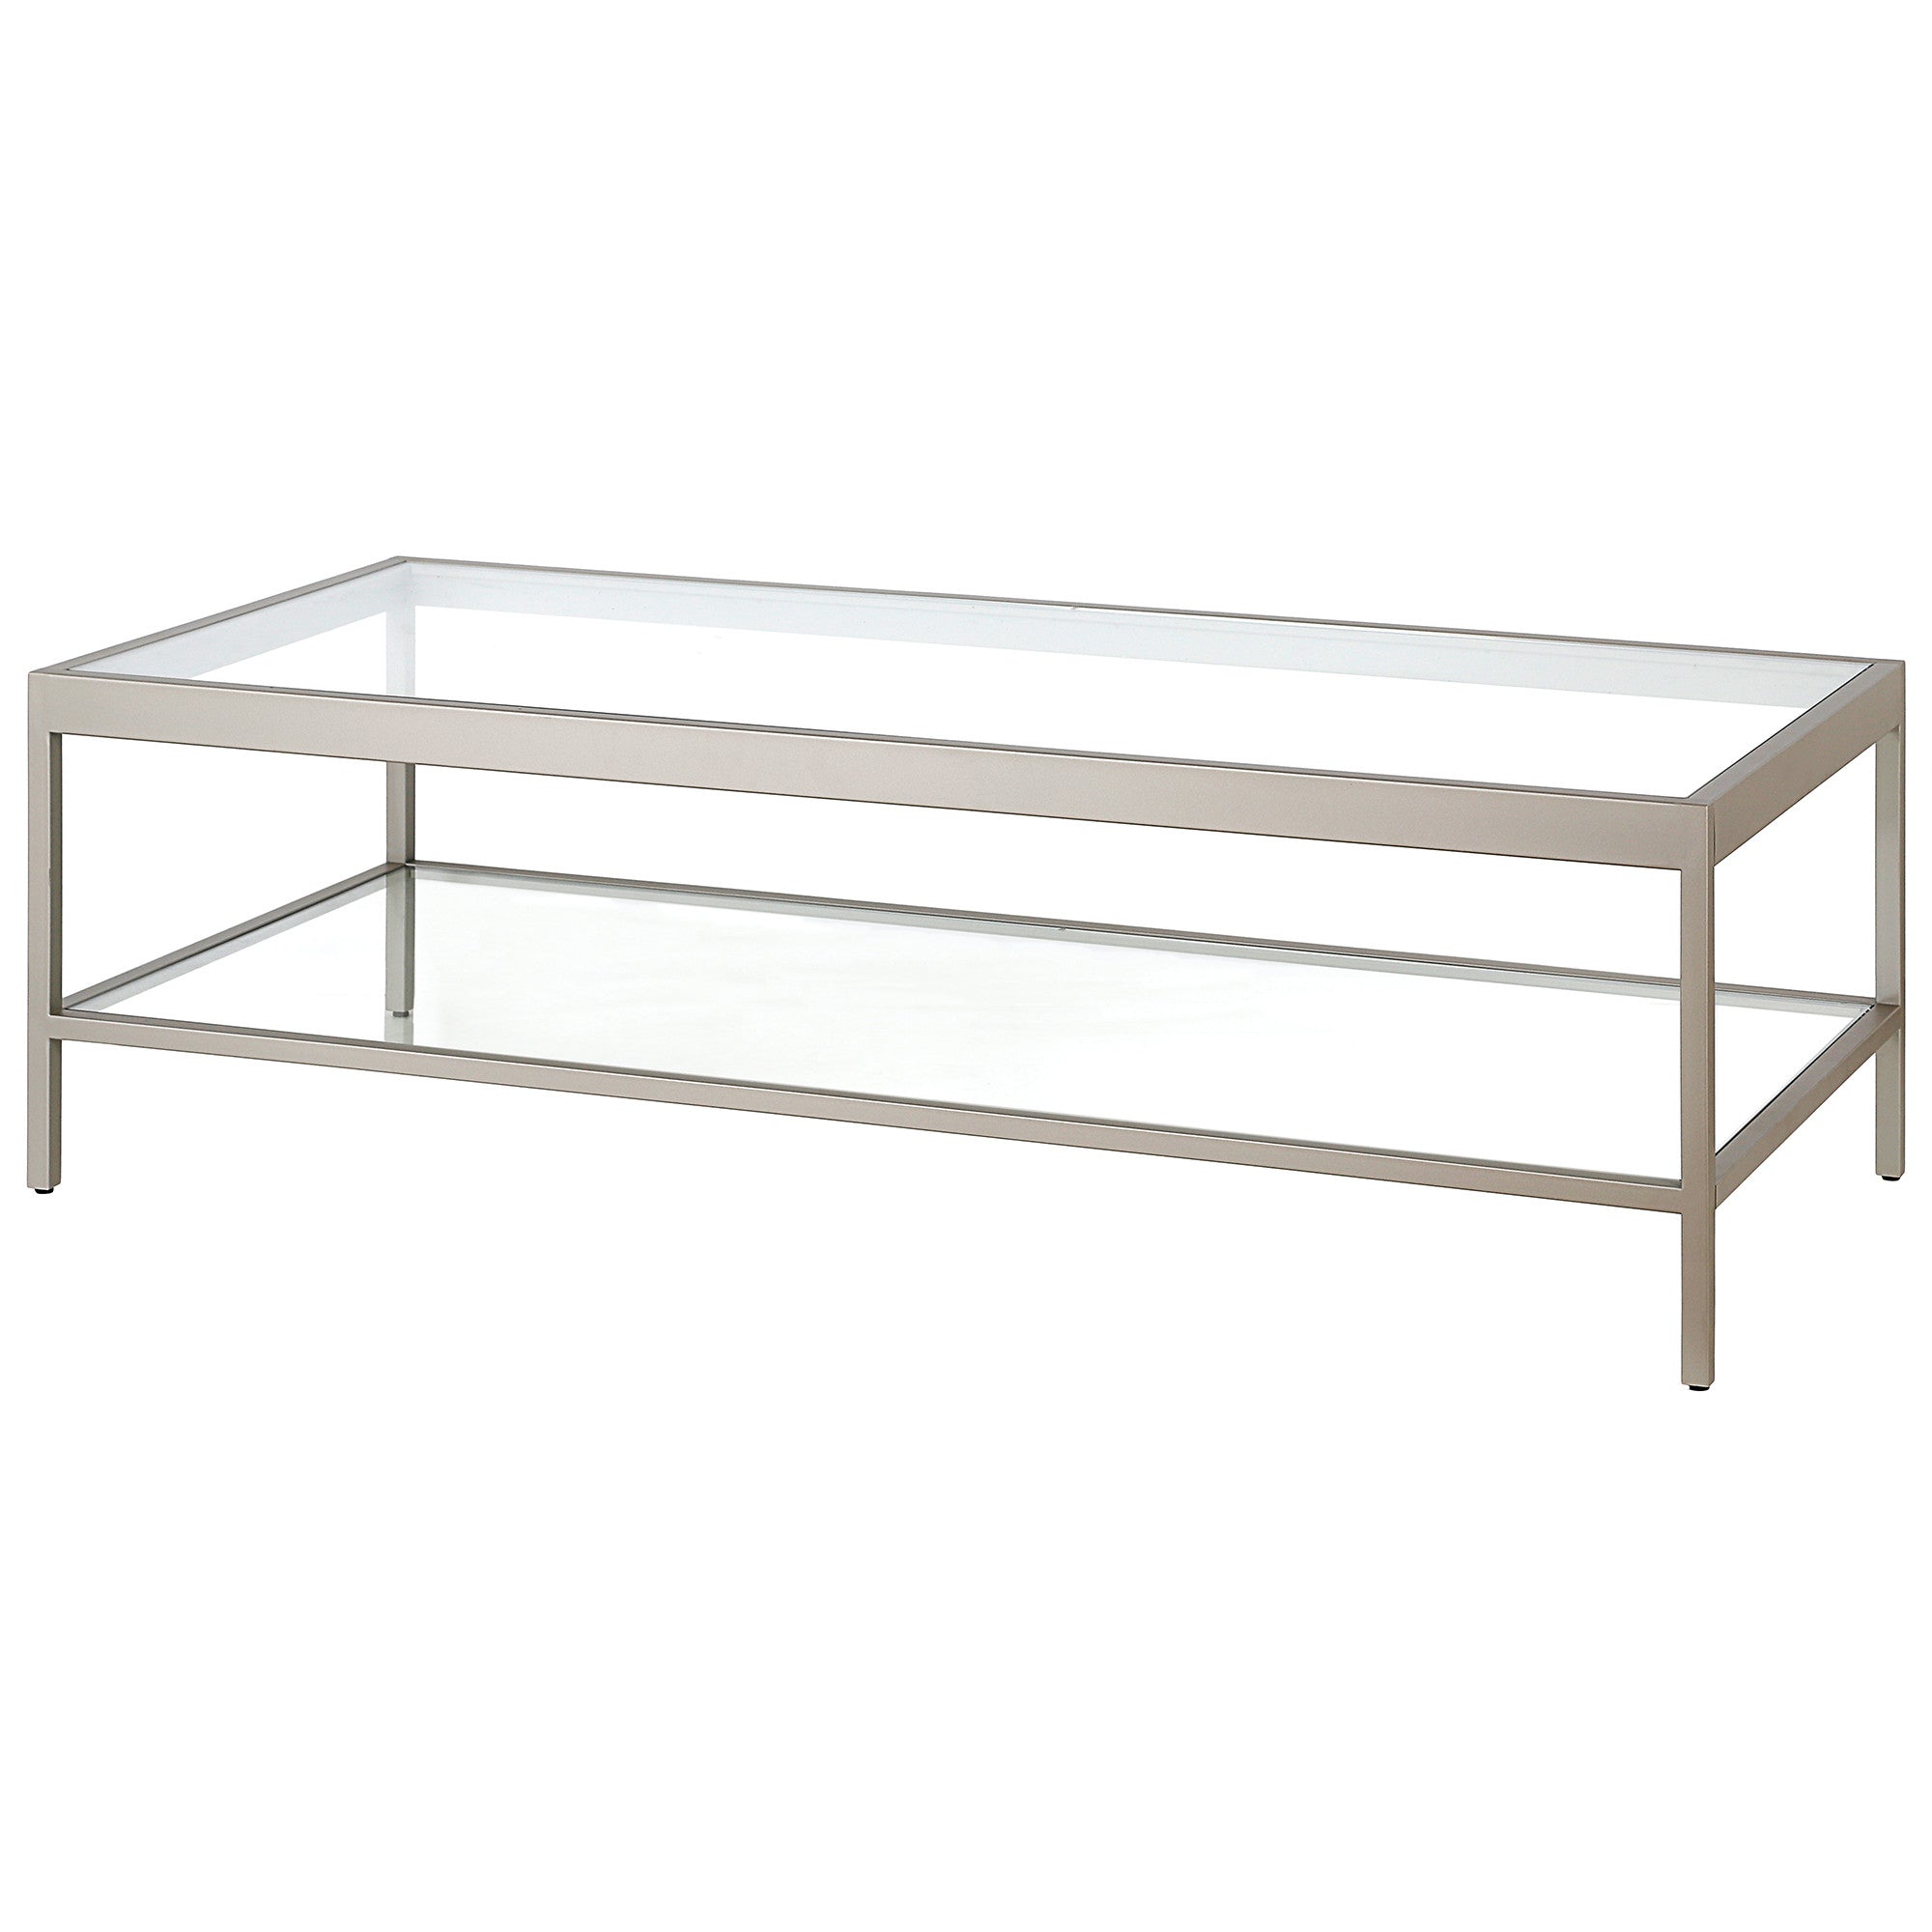 54" Silver Glass And Steel Coffee Table With Shelf